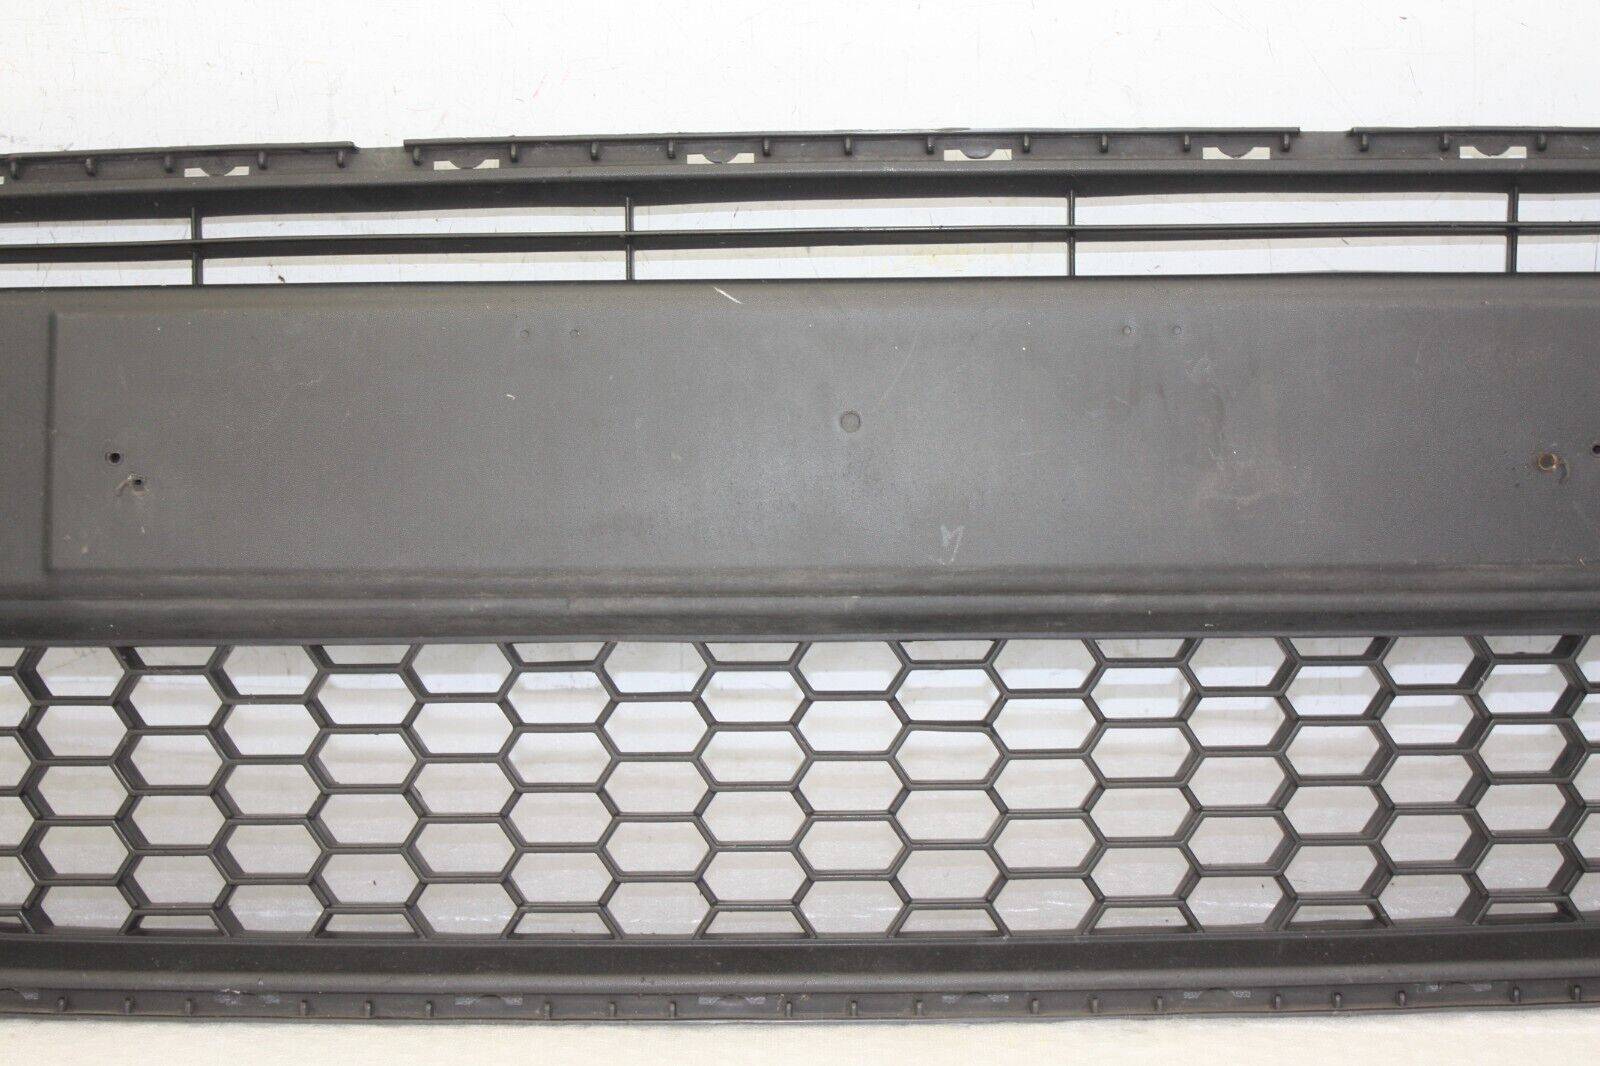 Kia-Picanto-Front-Bumper-Lower-Grill-2011-TO-2015-86569-1Y000-Genuine-DAMAGED-176319954983-3